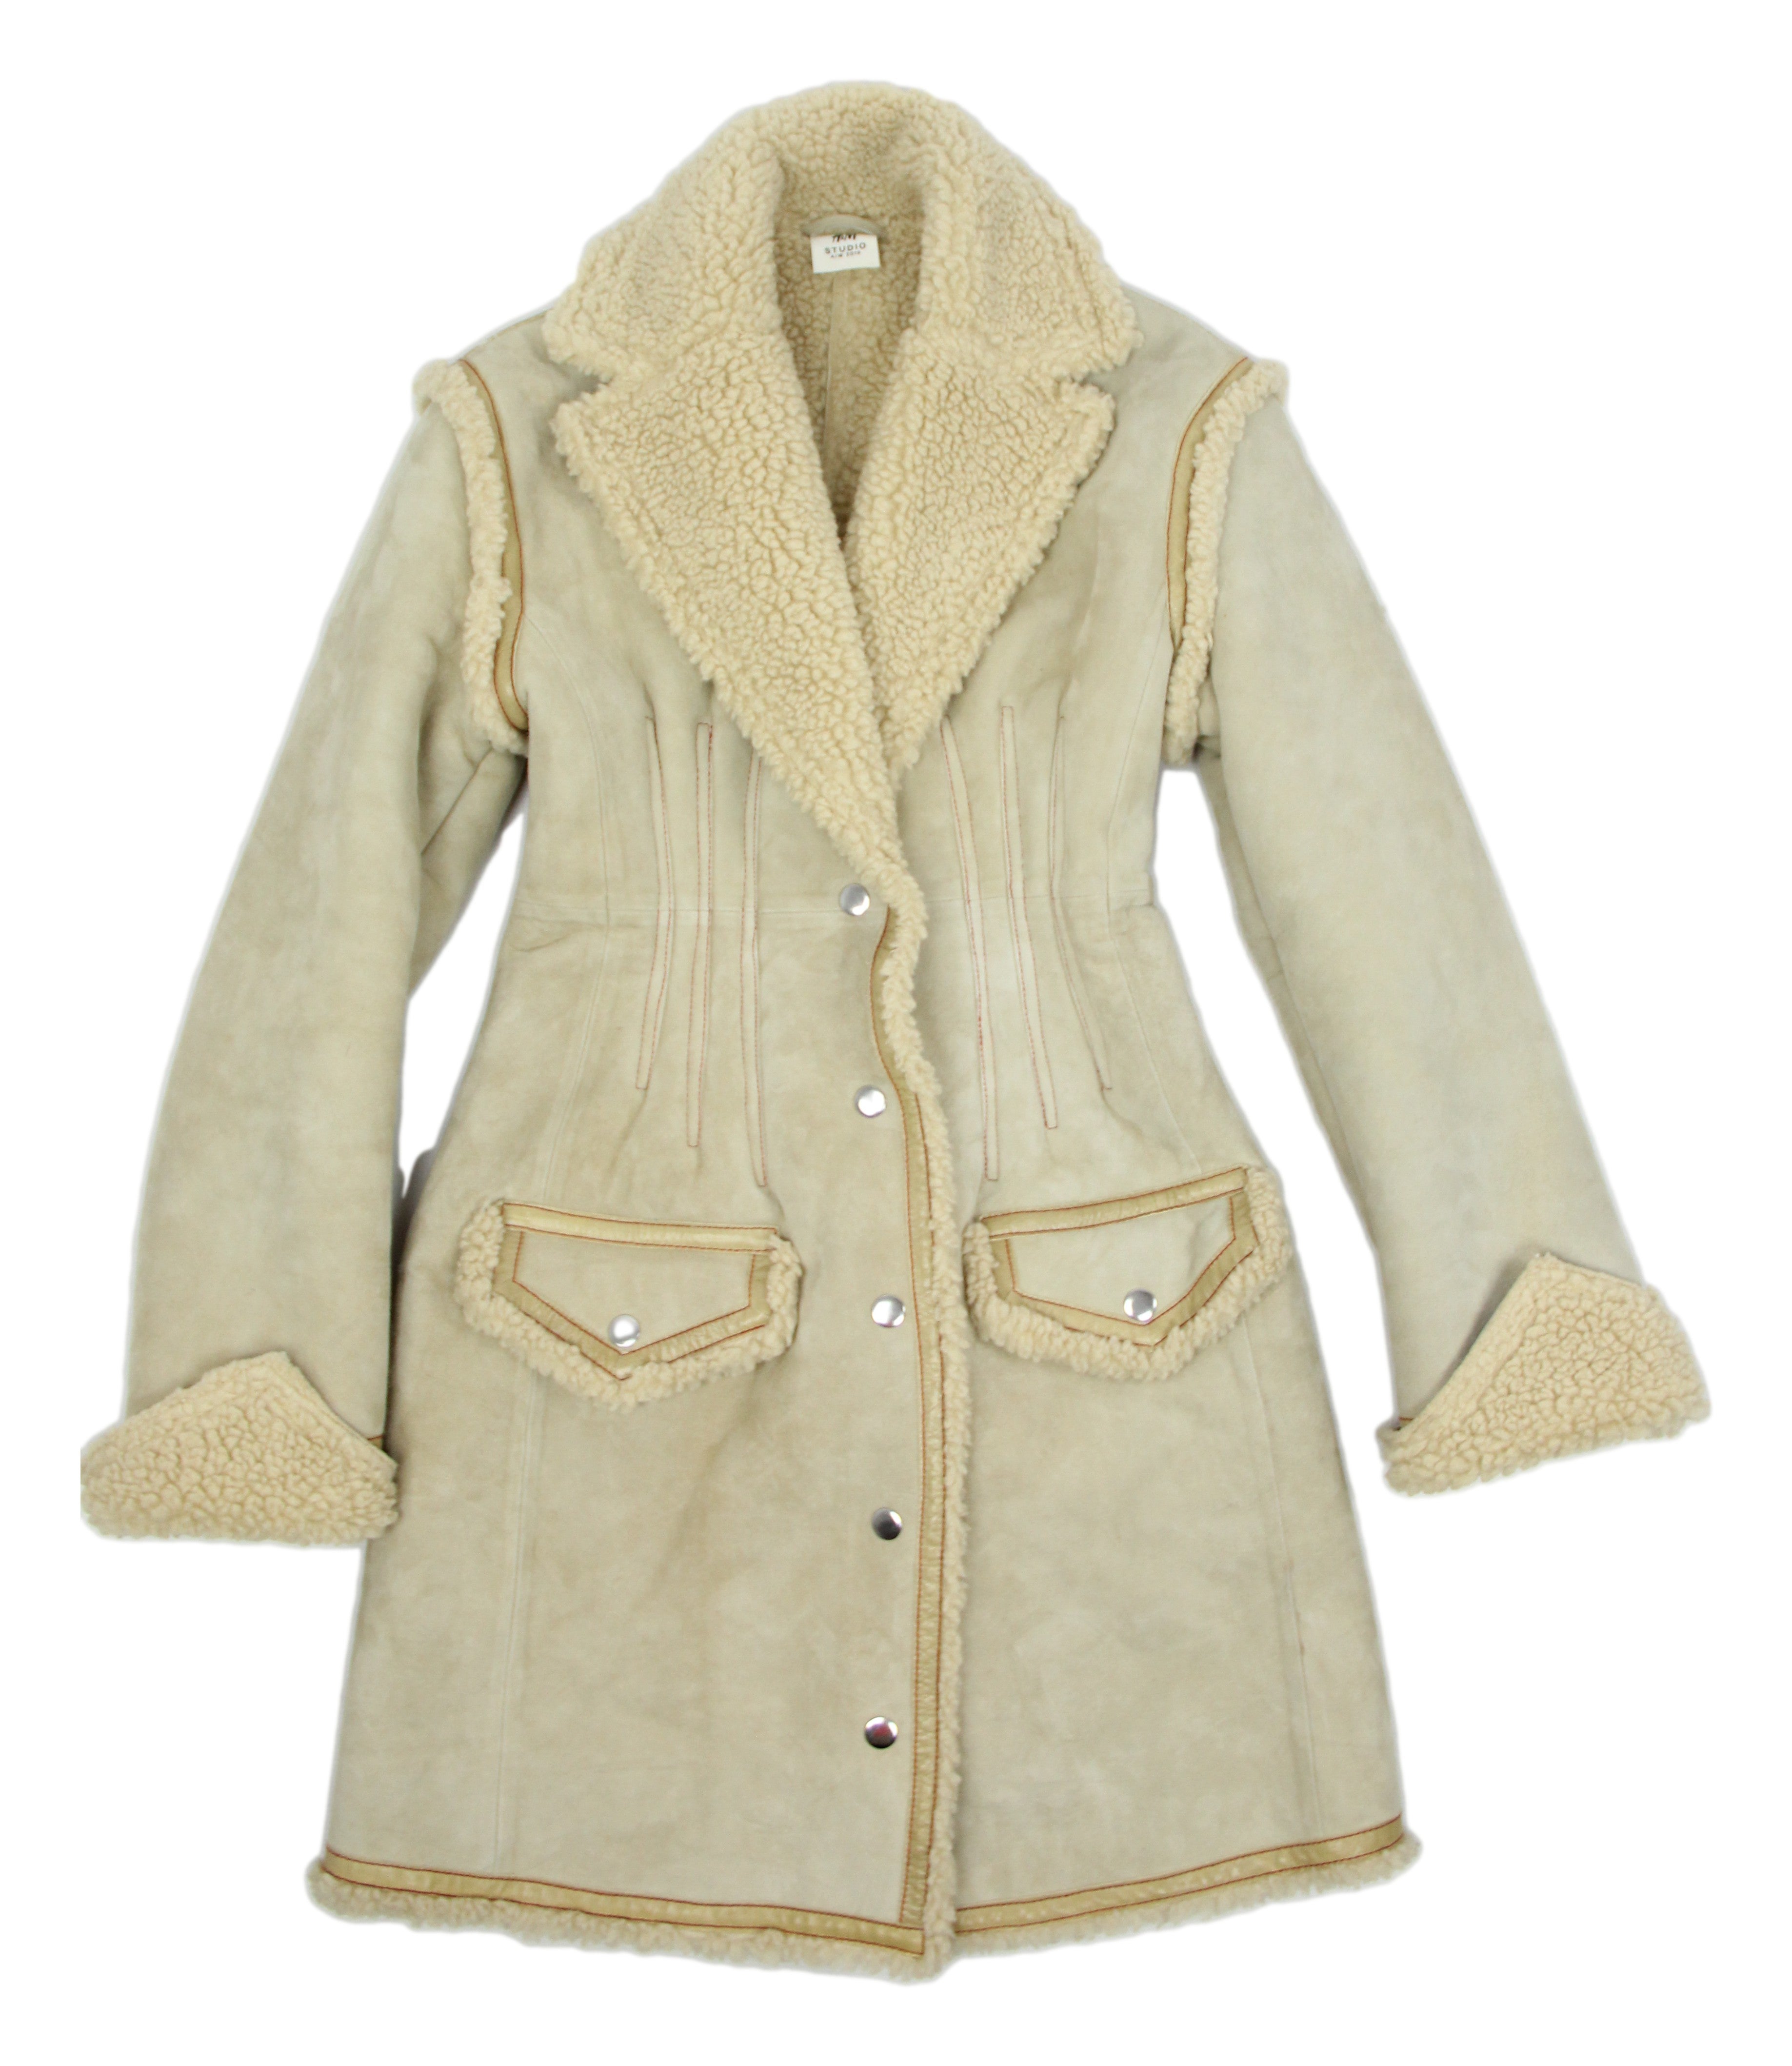 H&M Studio A/W 16 Suede & Faux Shearling Ivory Coat, SIZE M